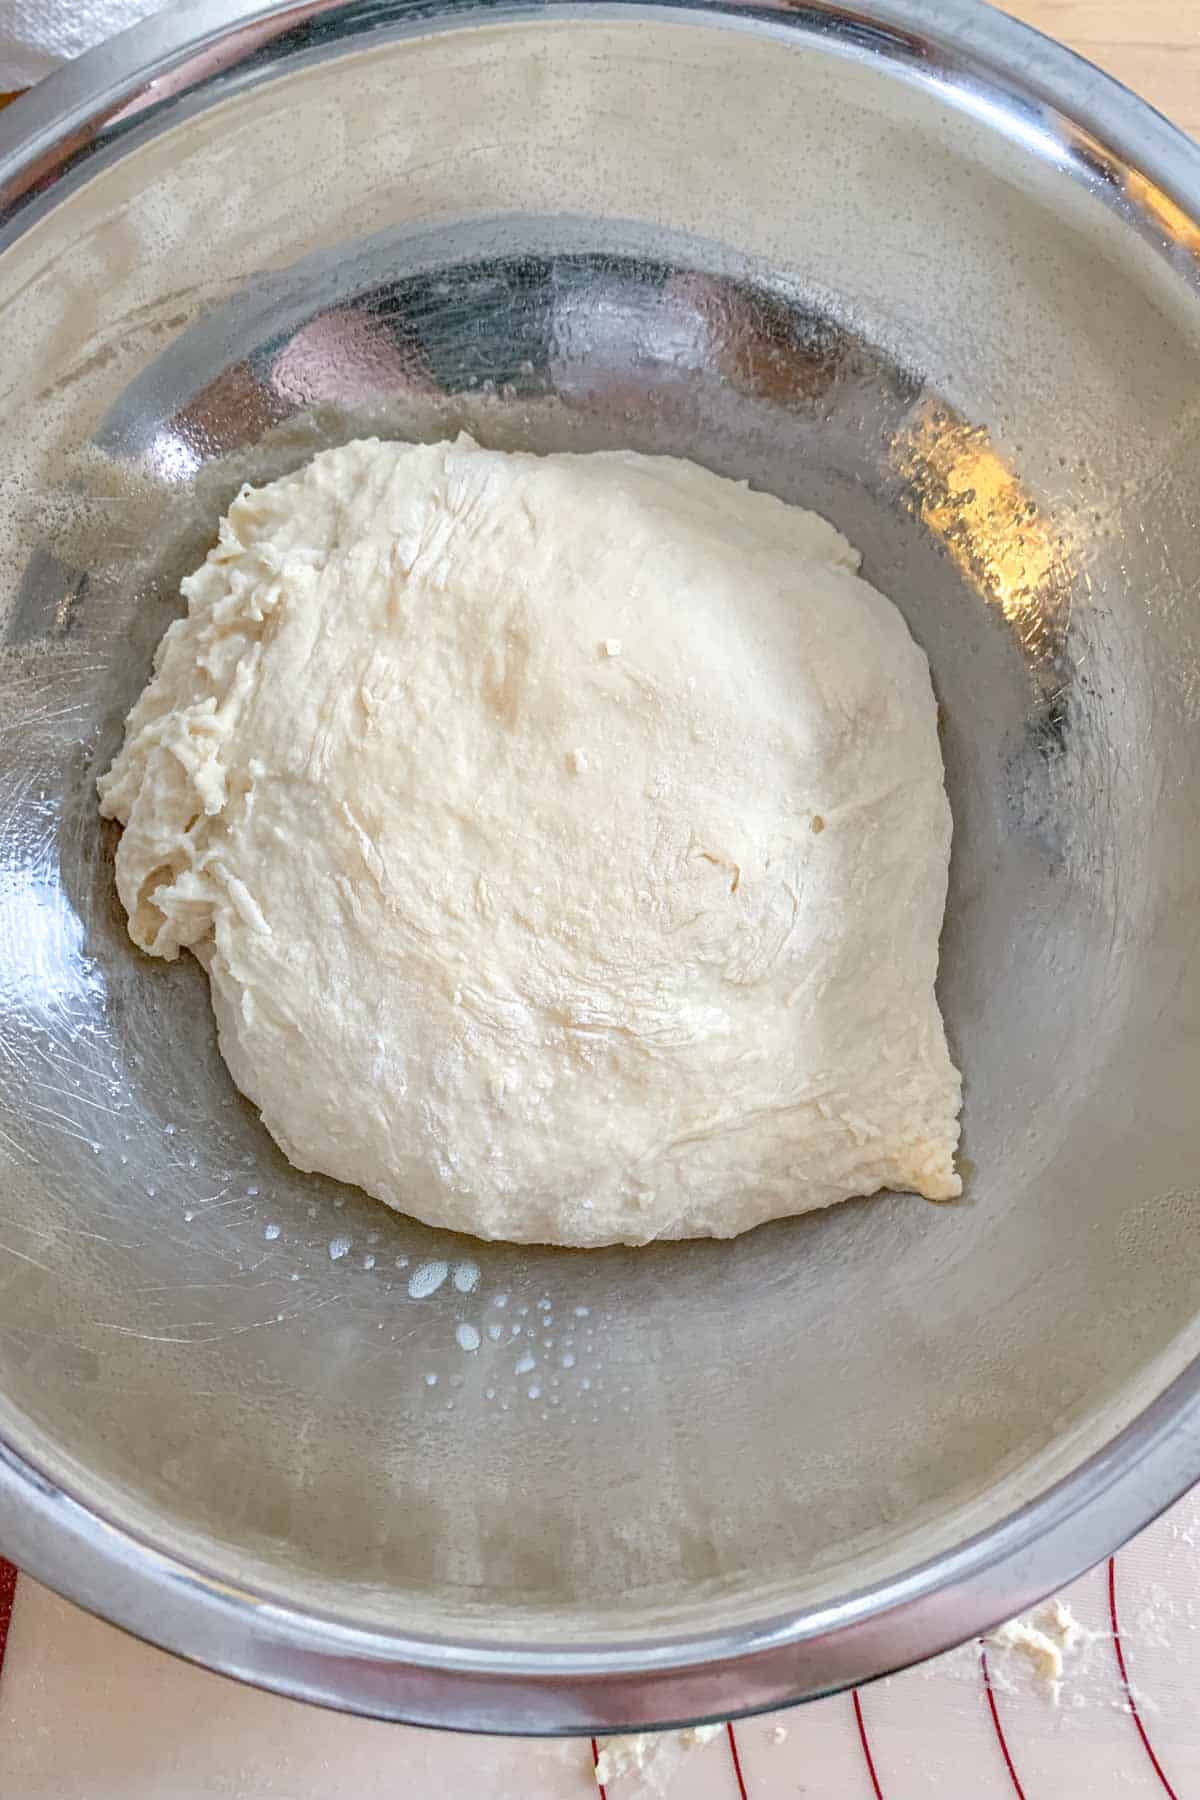 Mixed English muffin dough in a bowl before rising.